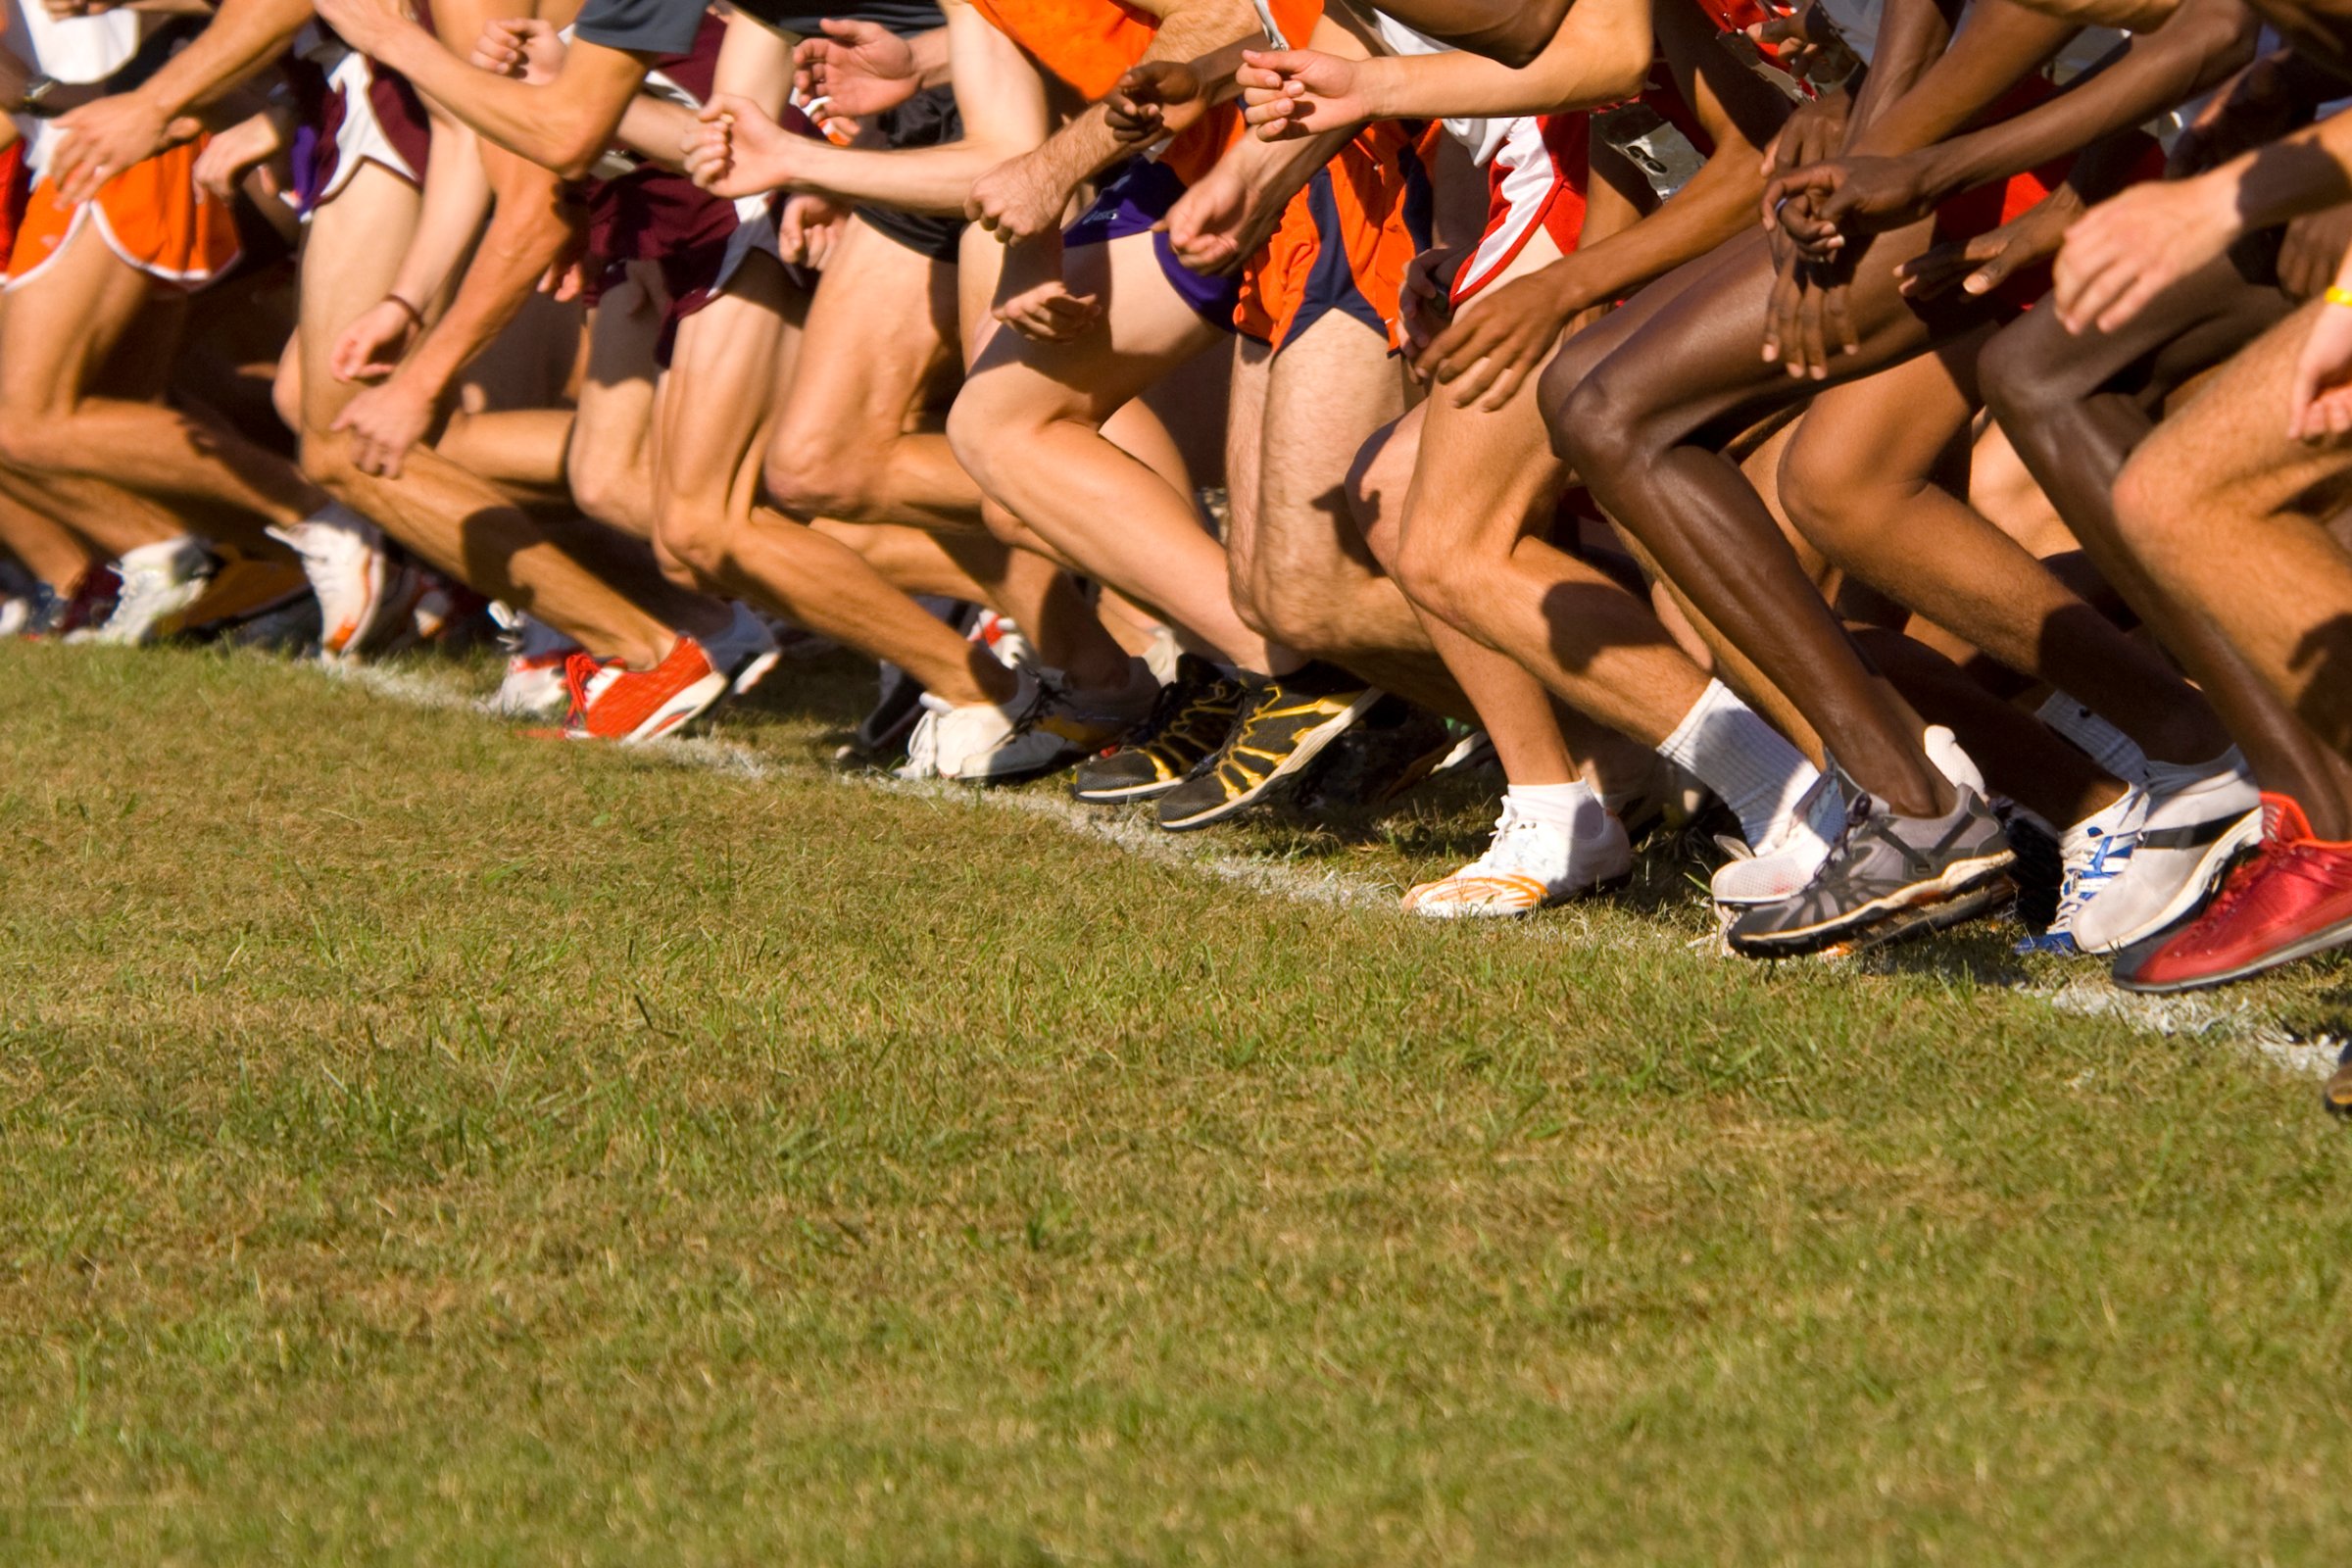 A big race with multiethnic participants